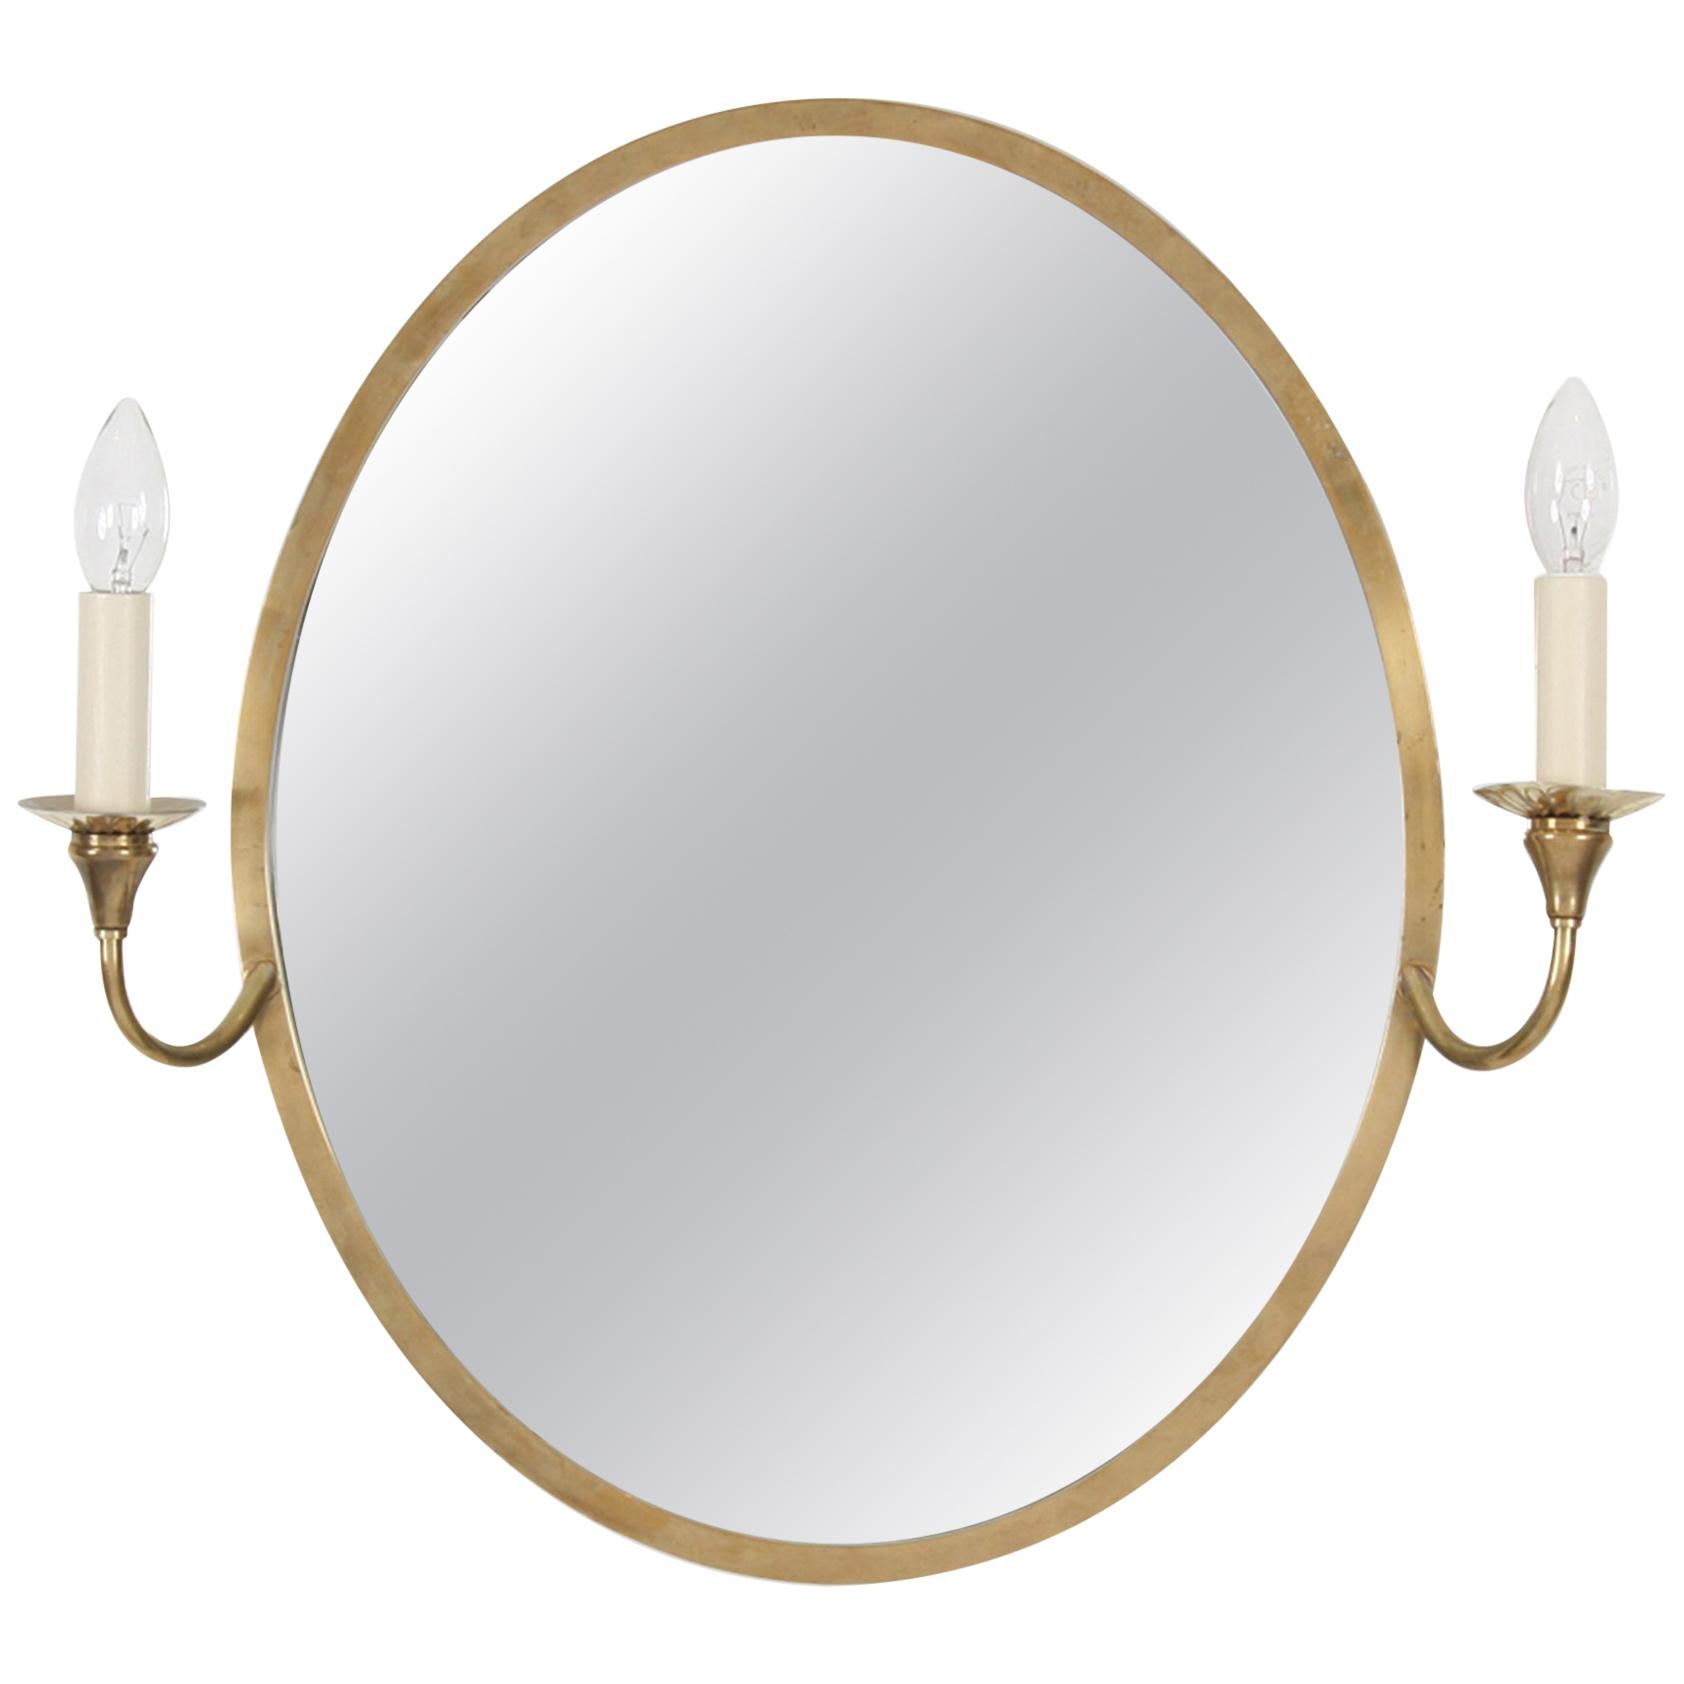 French Oval Mirror with Candle Lights